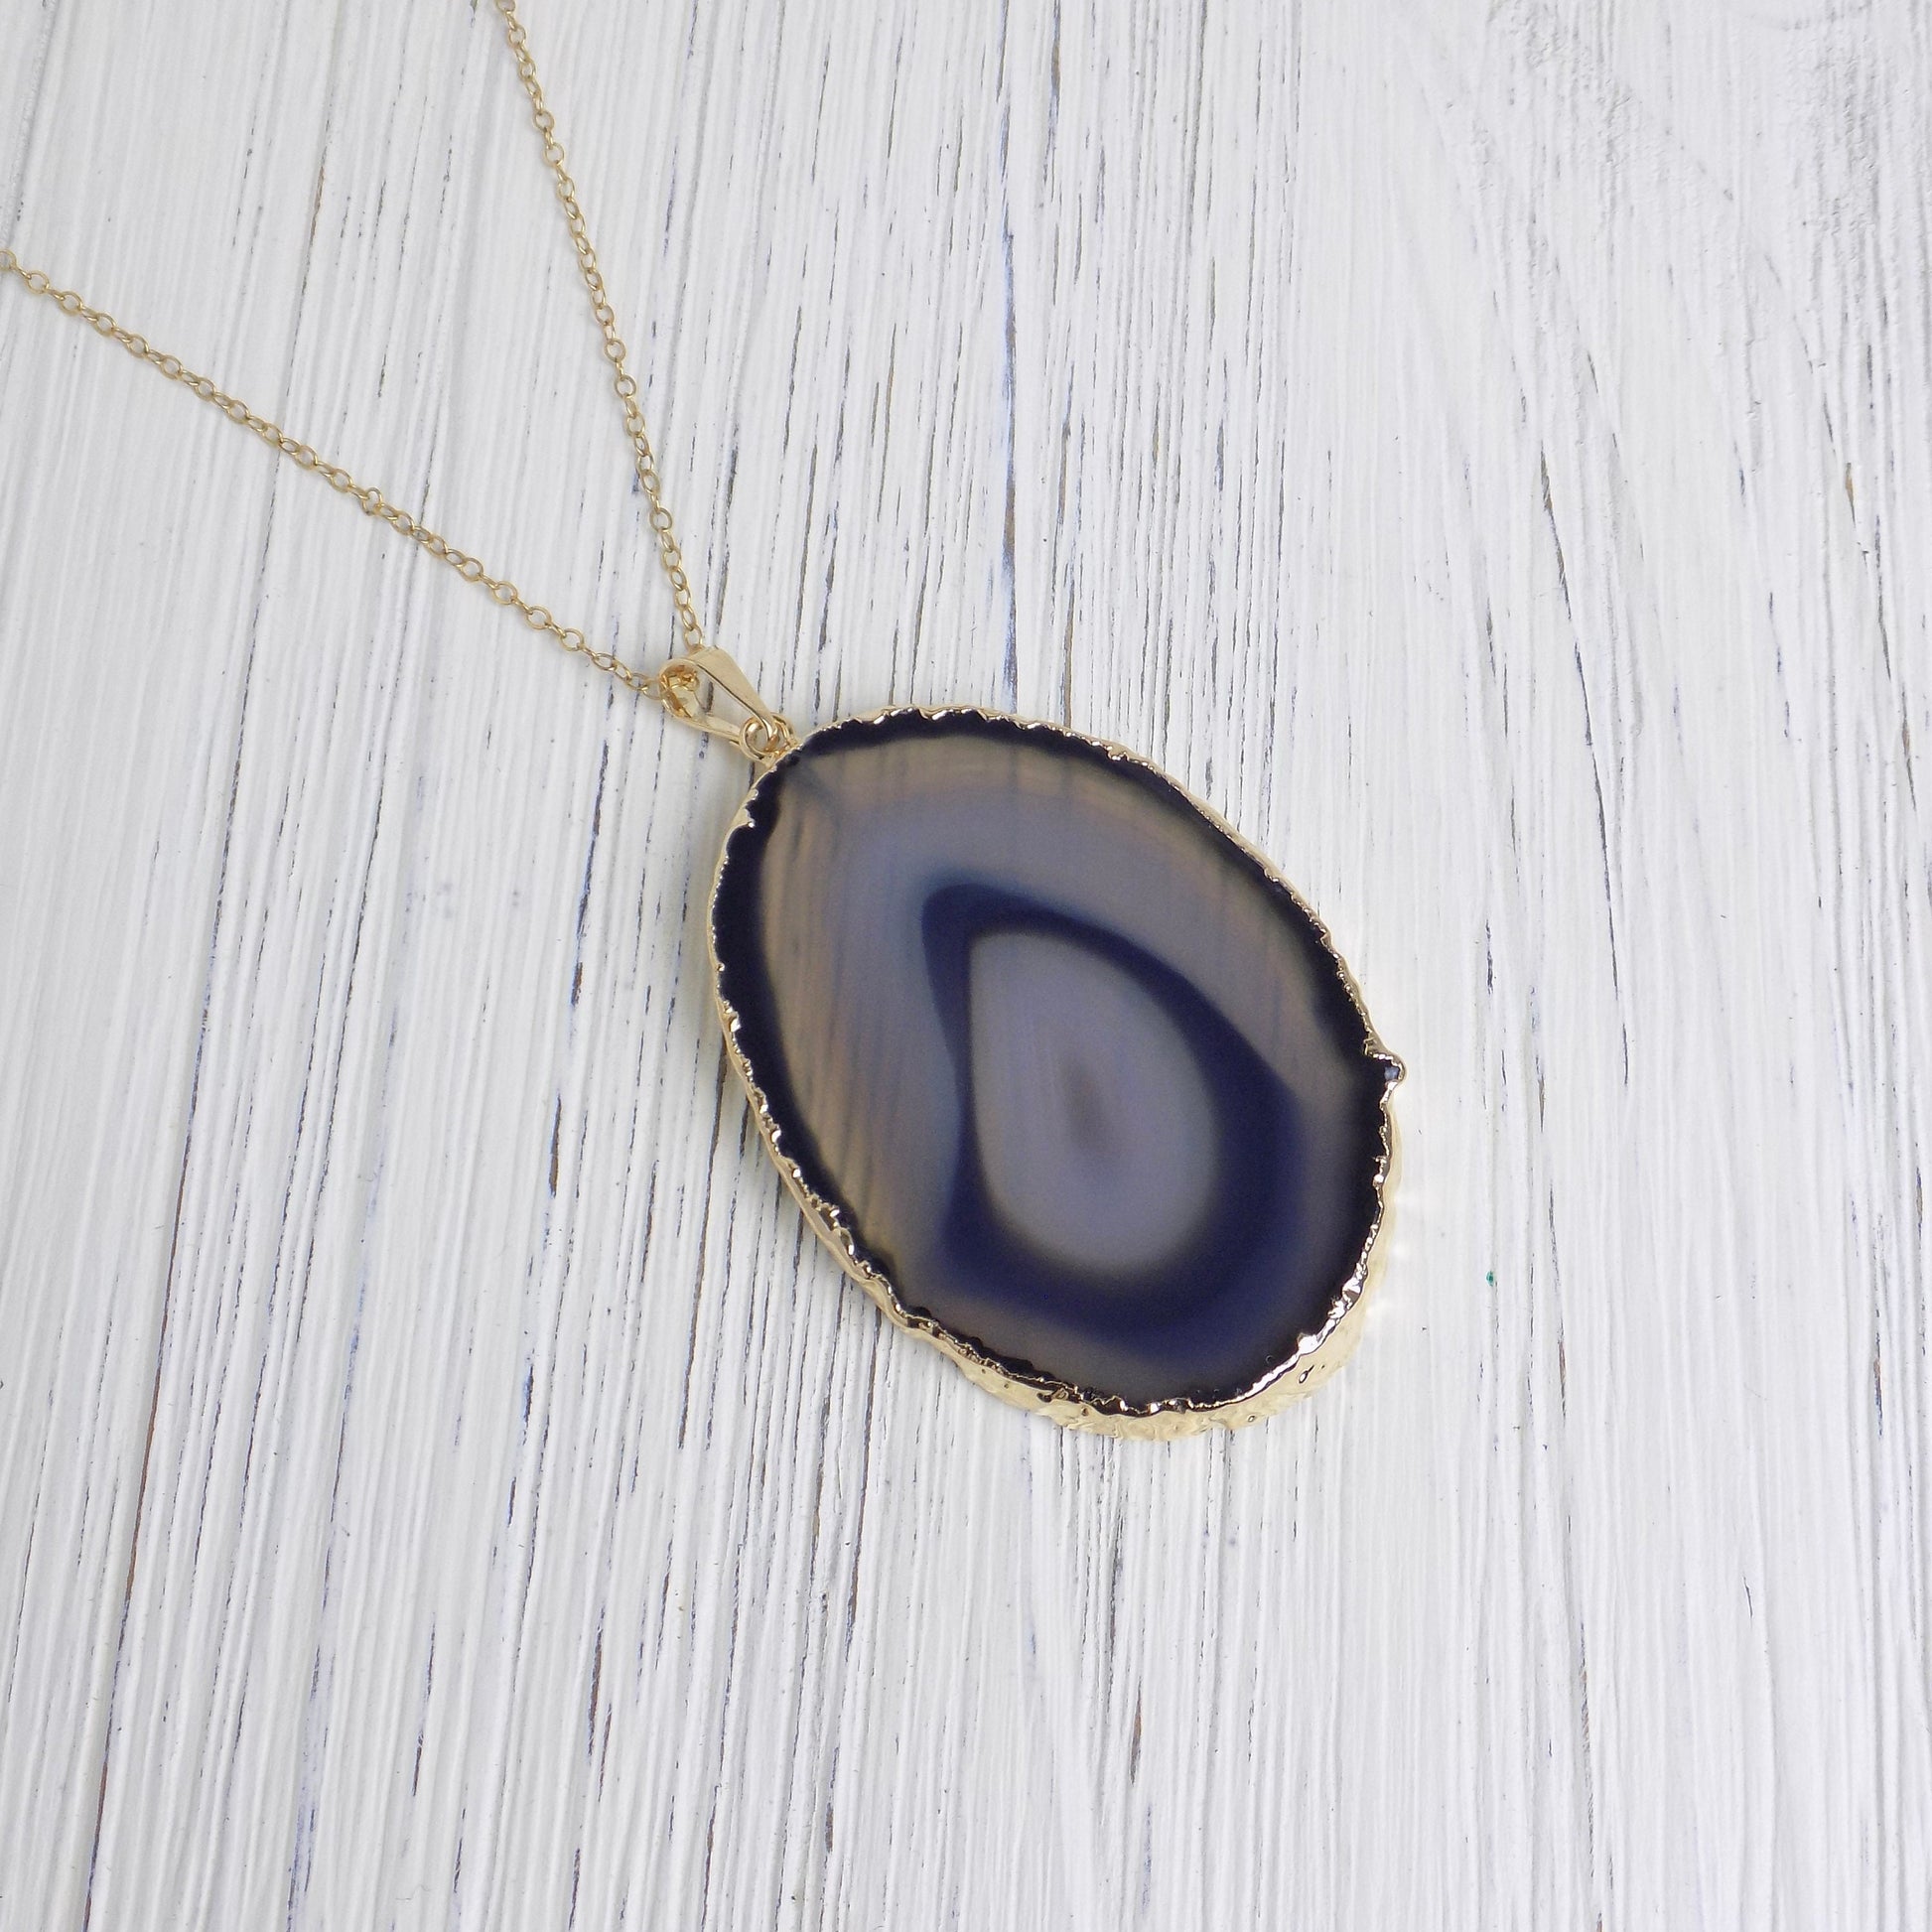 Unique Crystal Necklace, Black Agate Necklace Gold, Long Slice Pendant Necklaces Women's, Gifts For Mom, G14-208